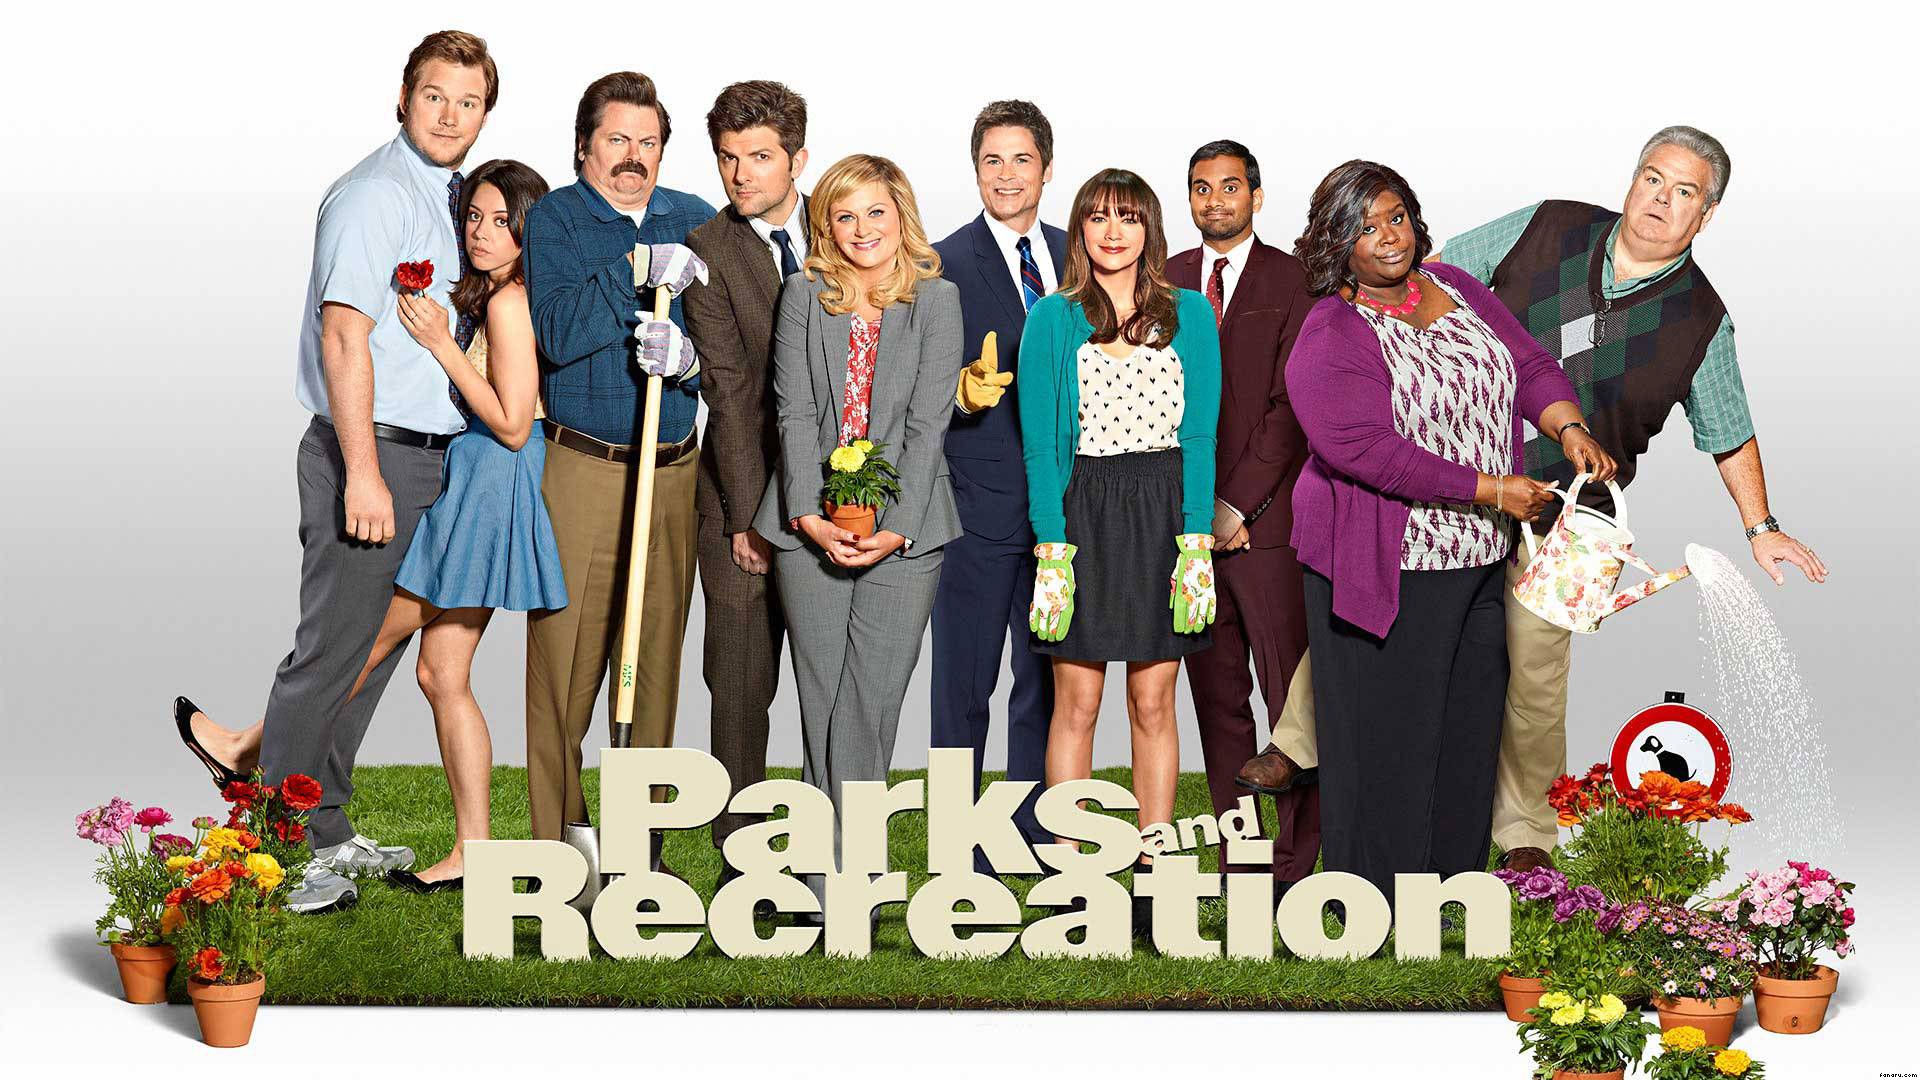 Parks And Recreation Wallpaper G8r9ij8 4usky